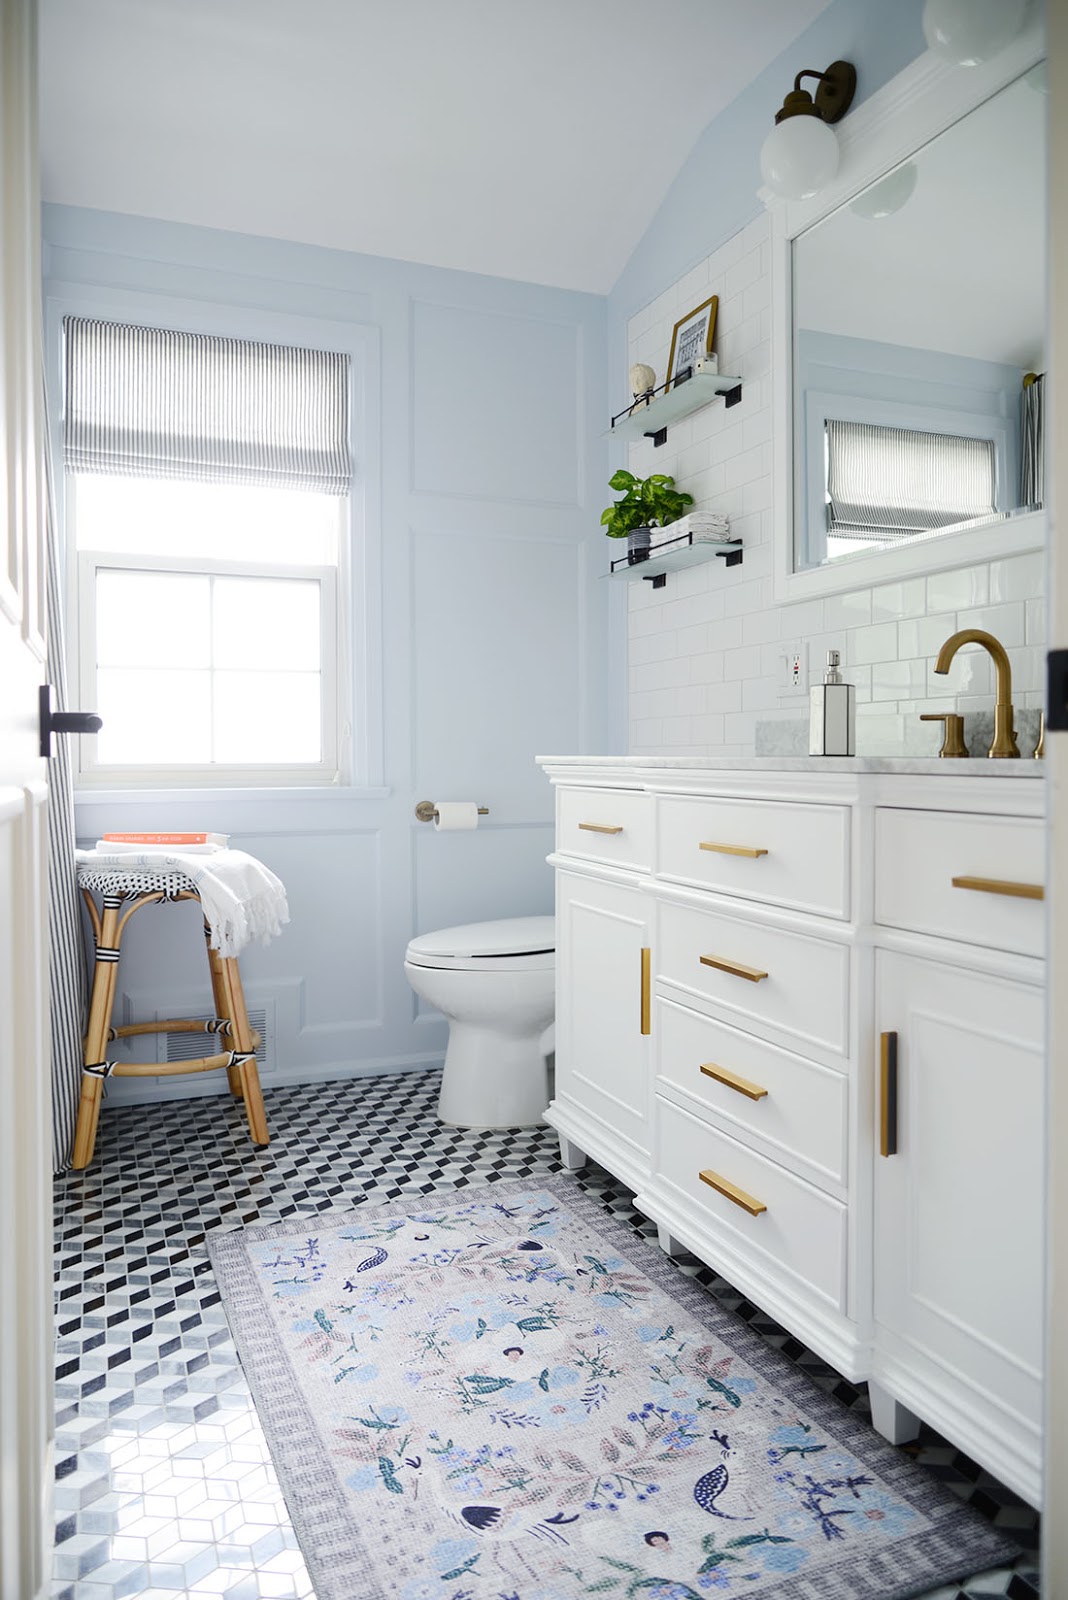 Repræsentere Ocean Fil Mixing Metals in the Bathroom - What To Do and What Not To Do - Rambling  Renovators